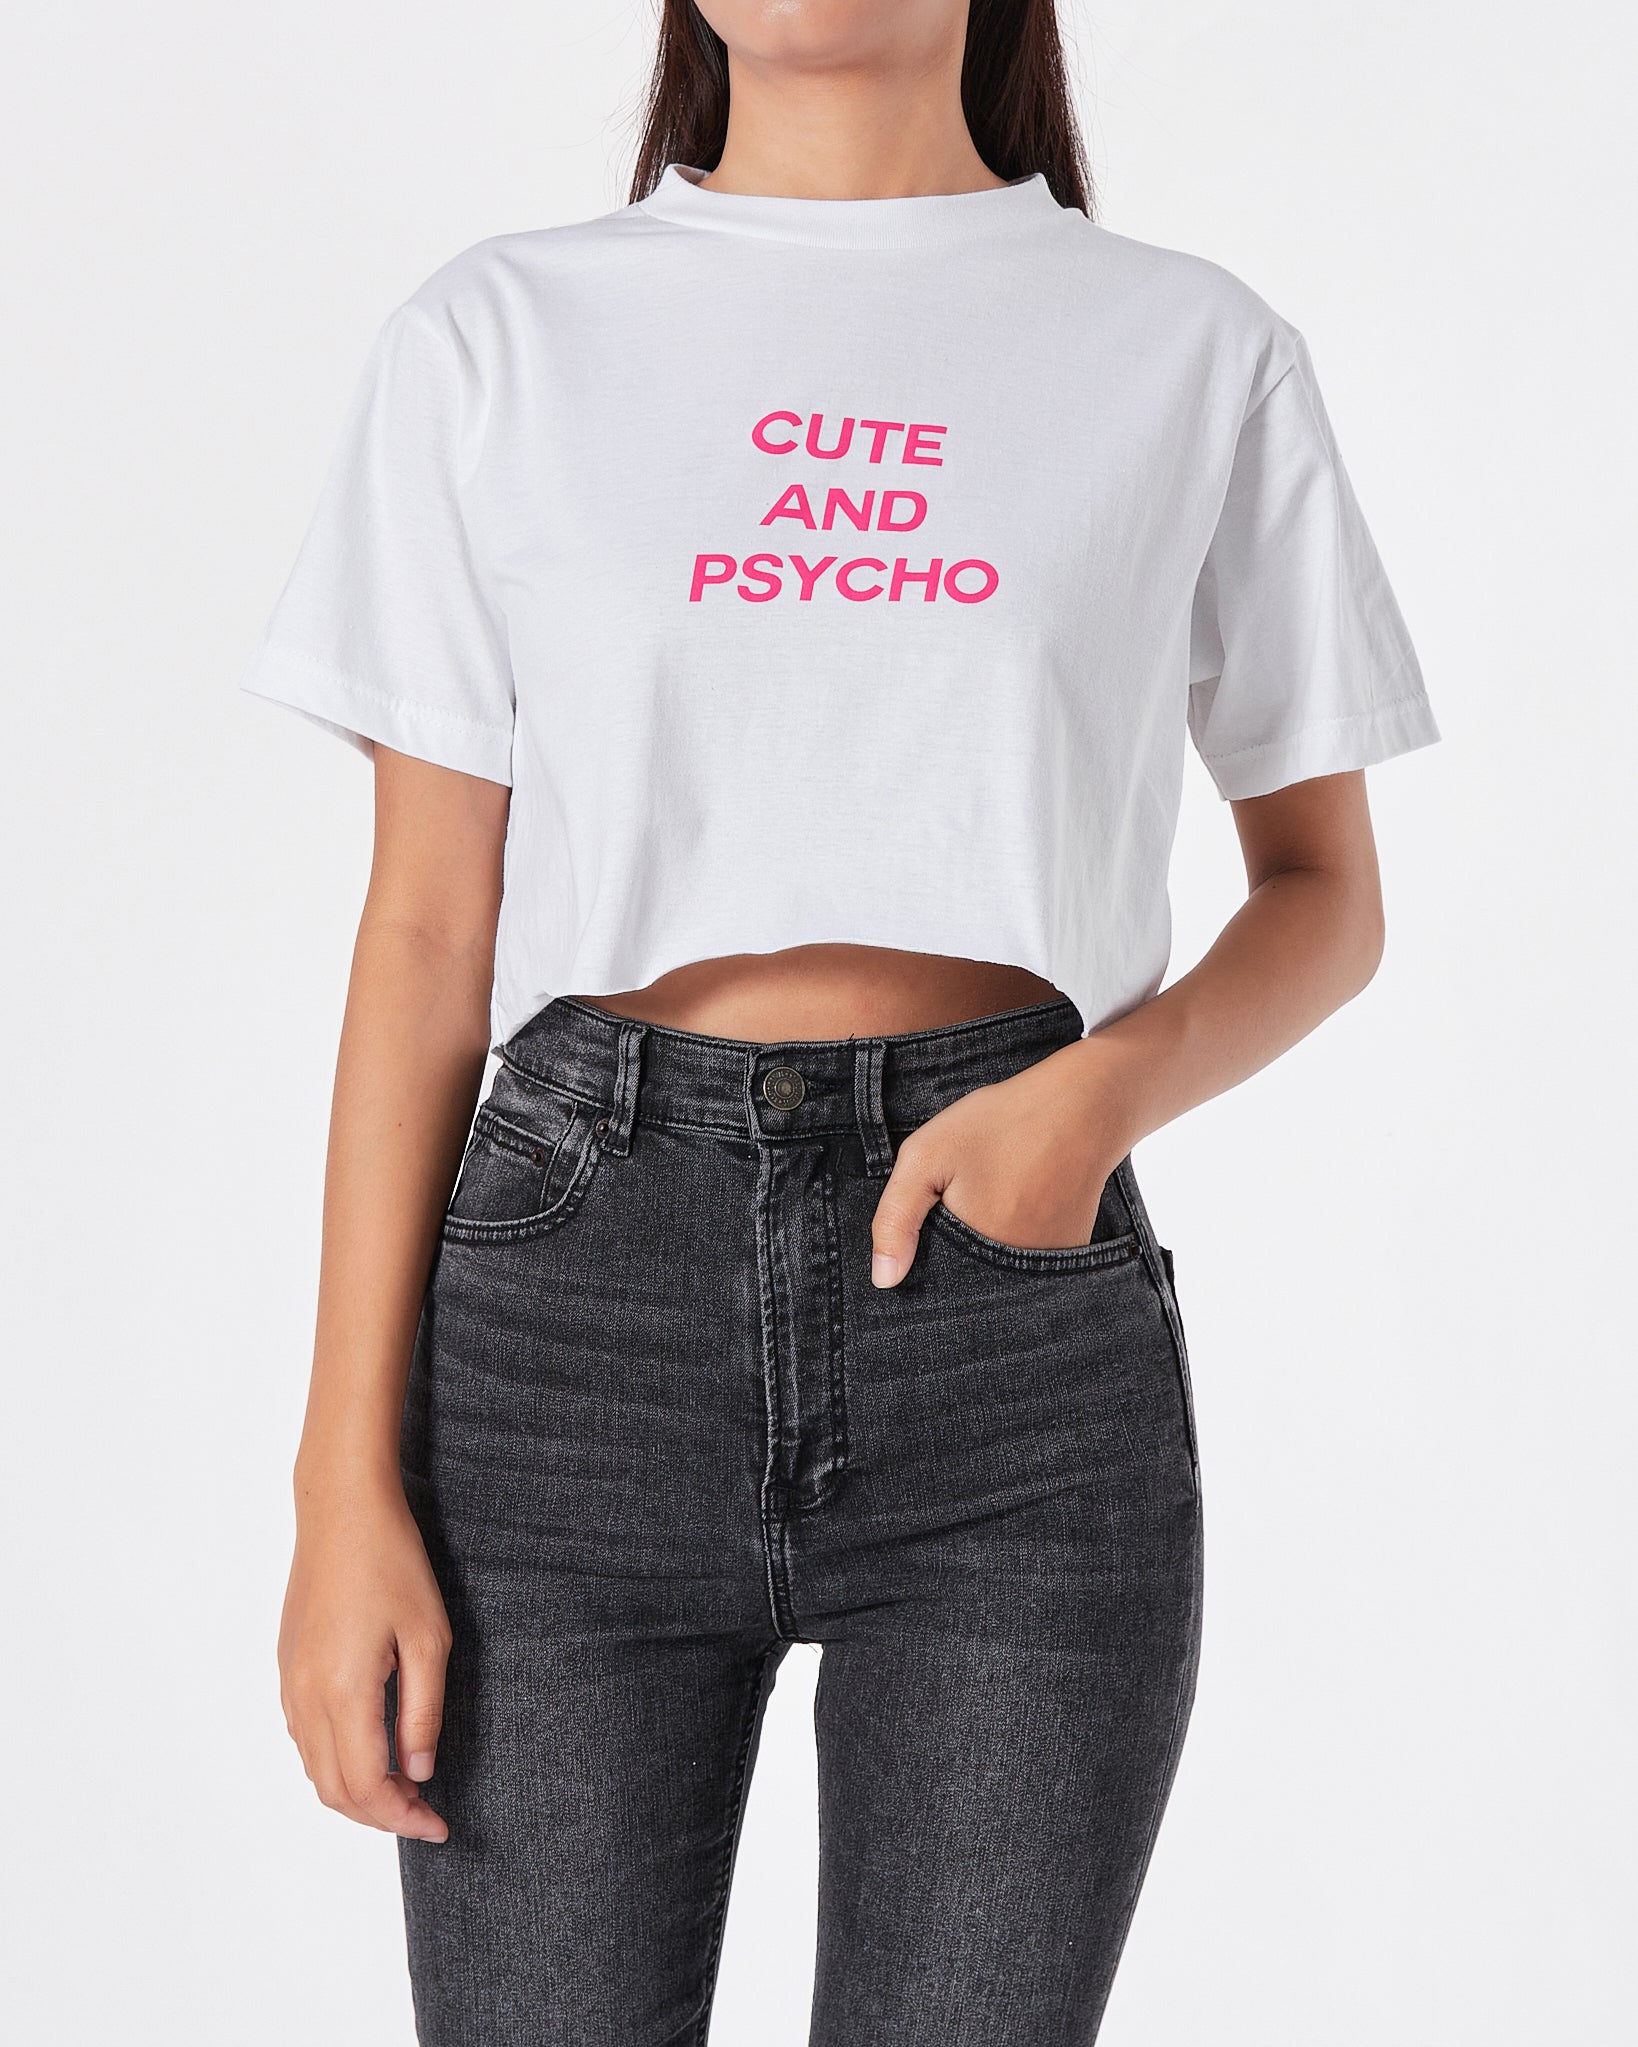 Cute And Psycho Lady White T-Shirt Crop Top 9.90